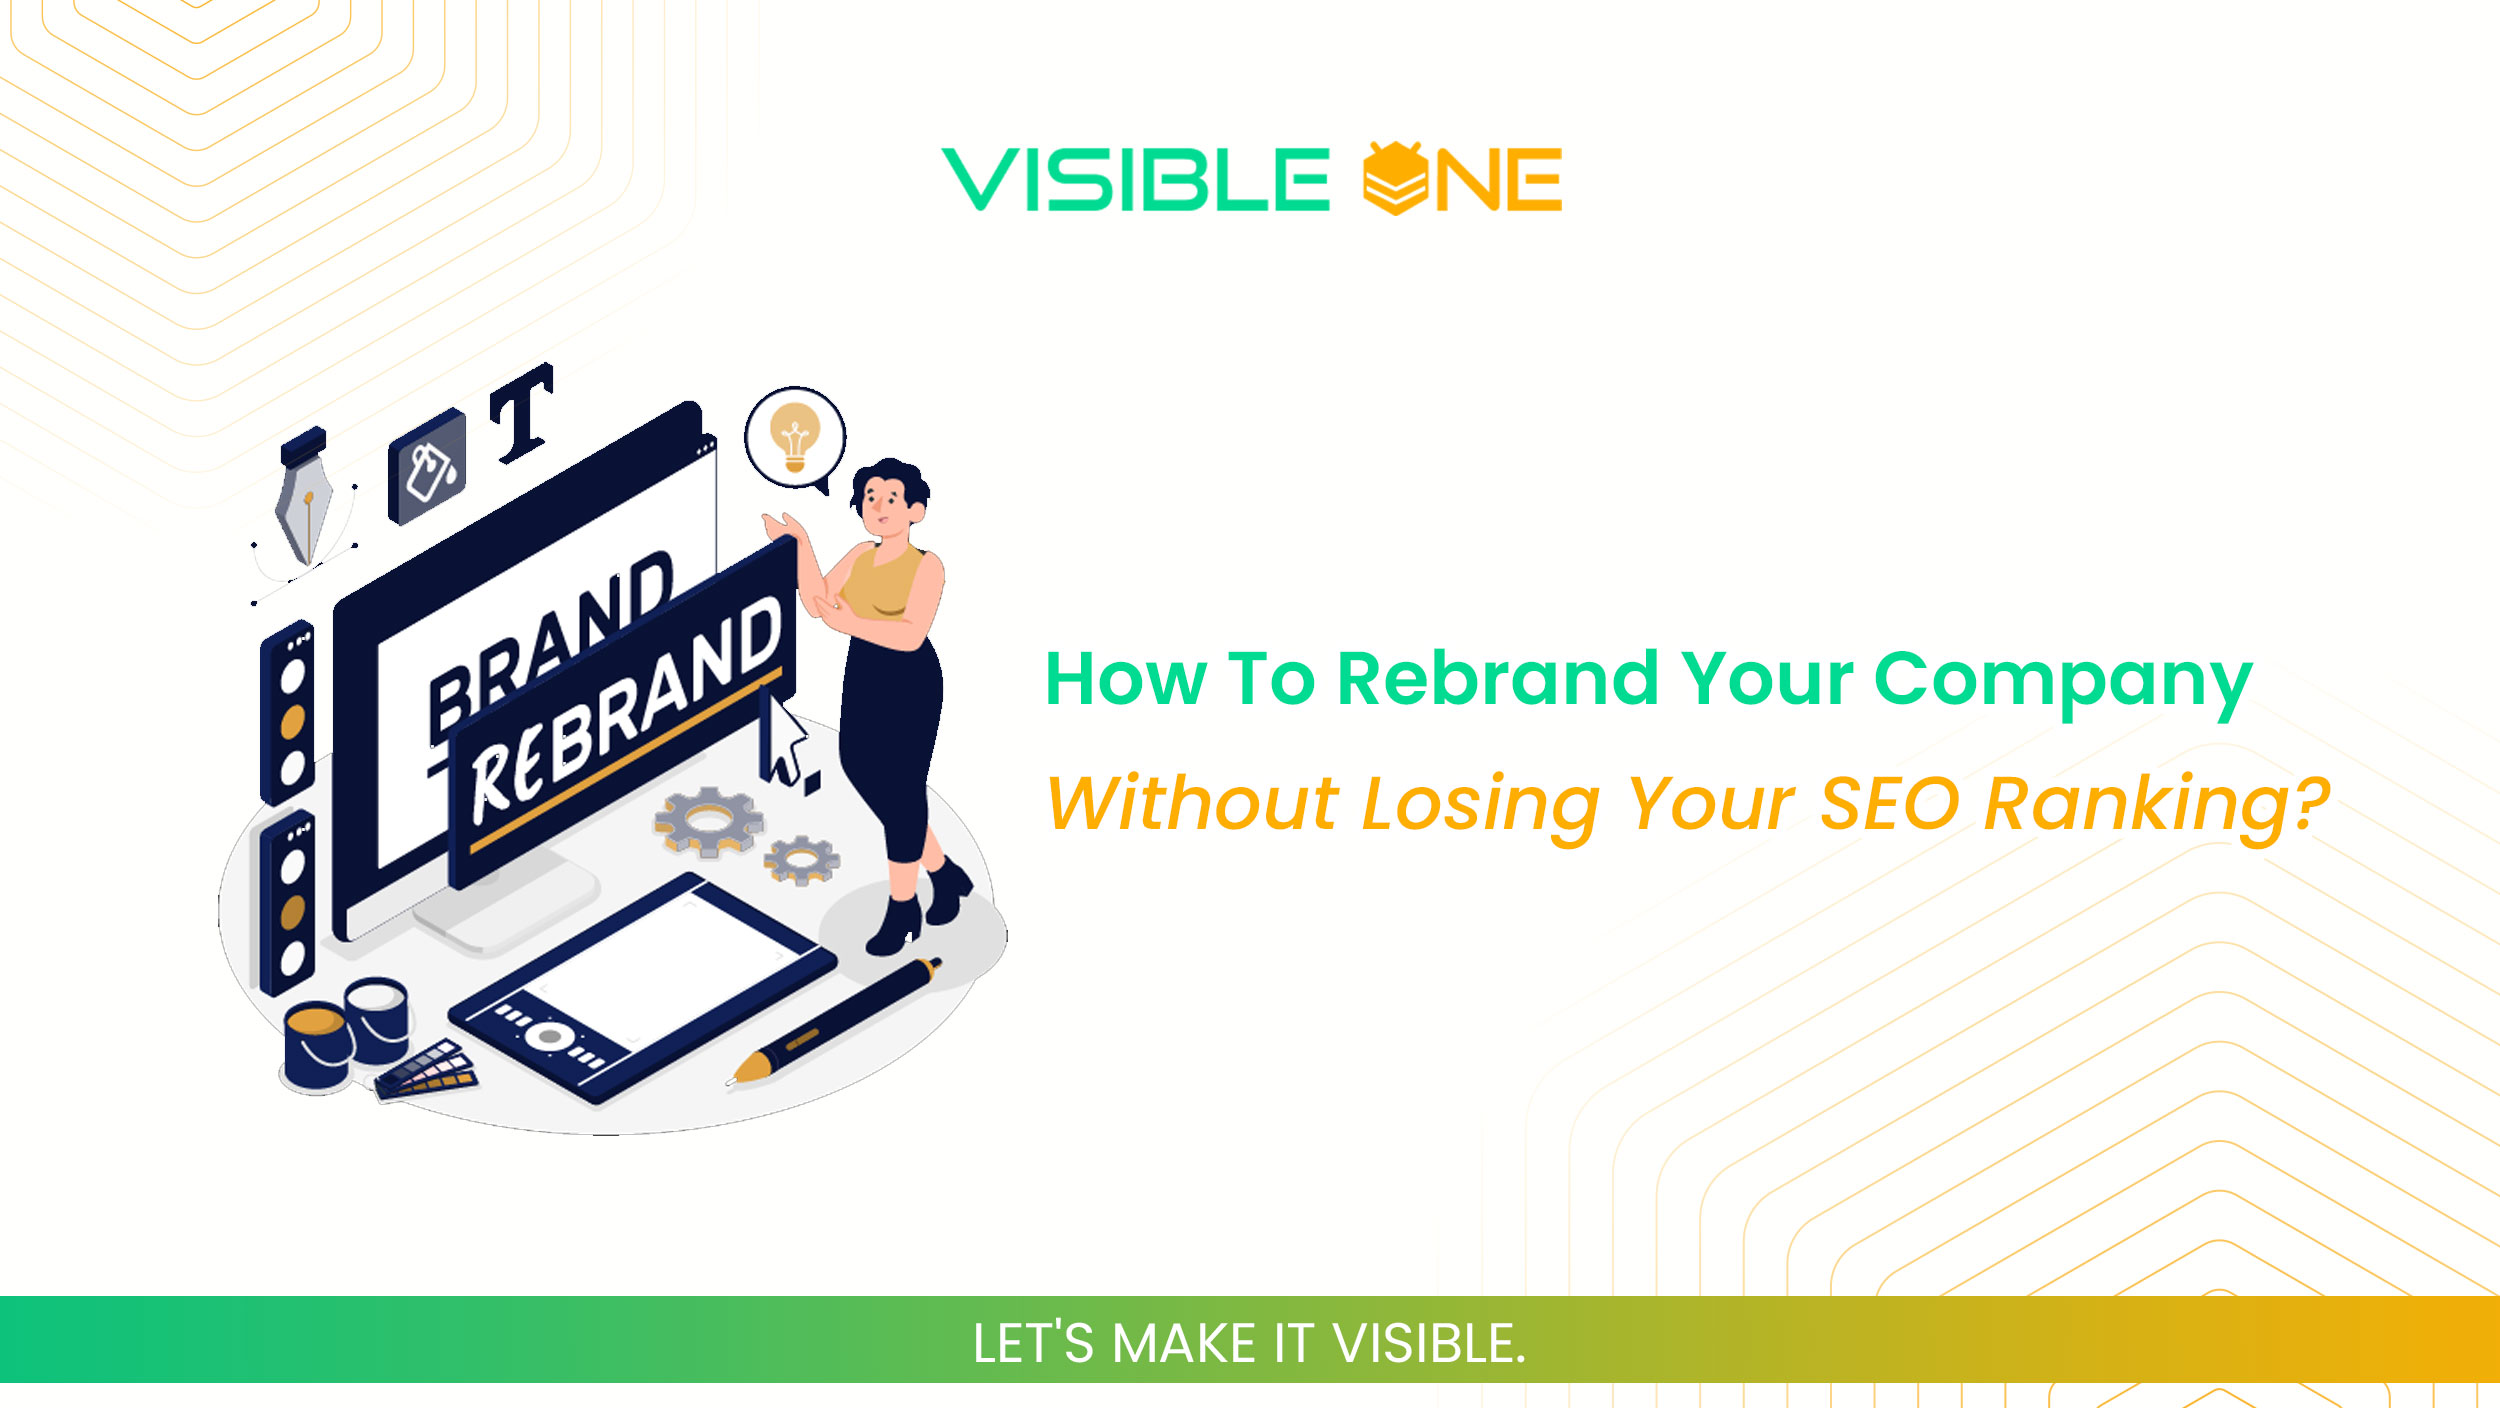 How To Rebrand Your Company Without Losing Your SEO Ranking?